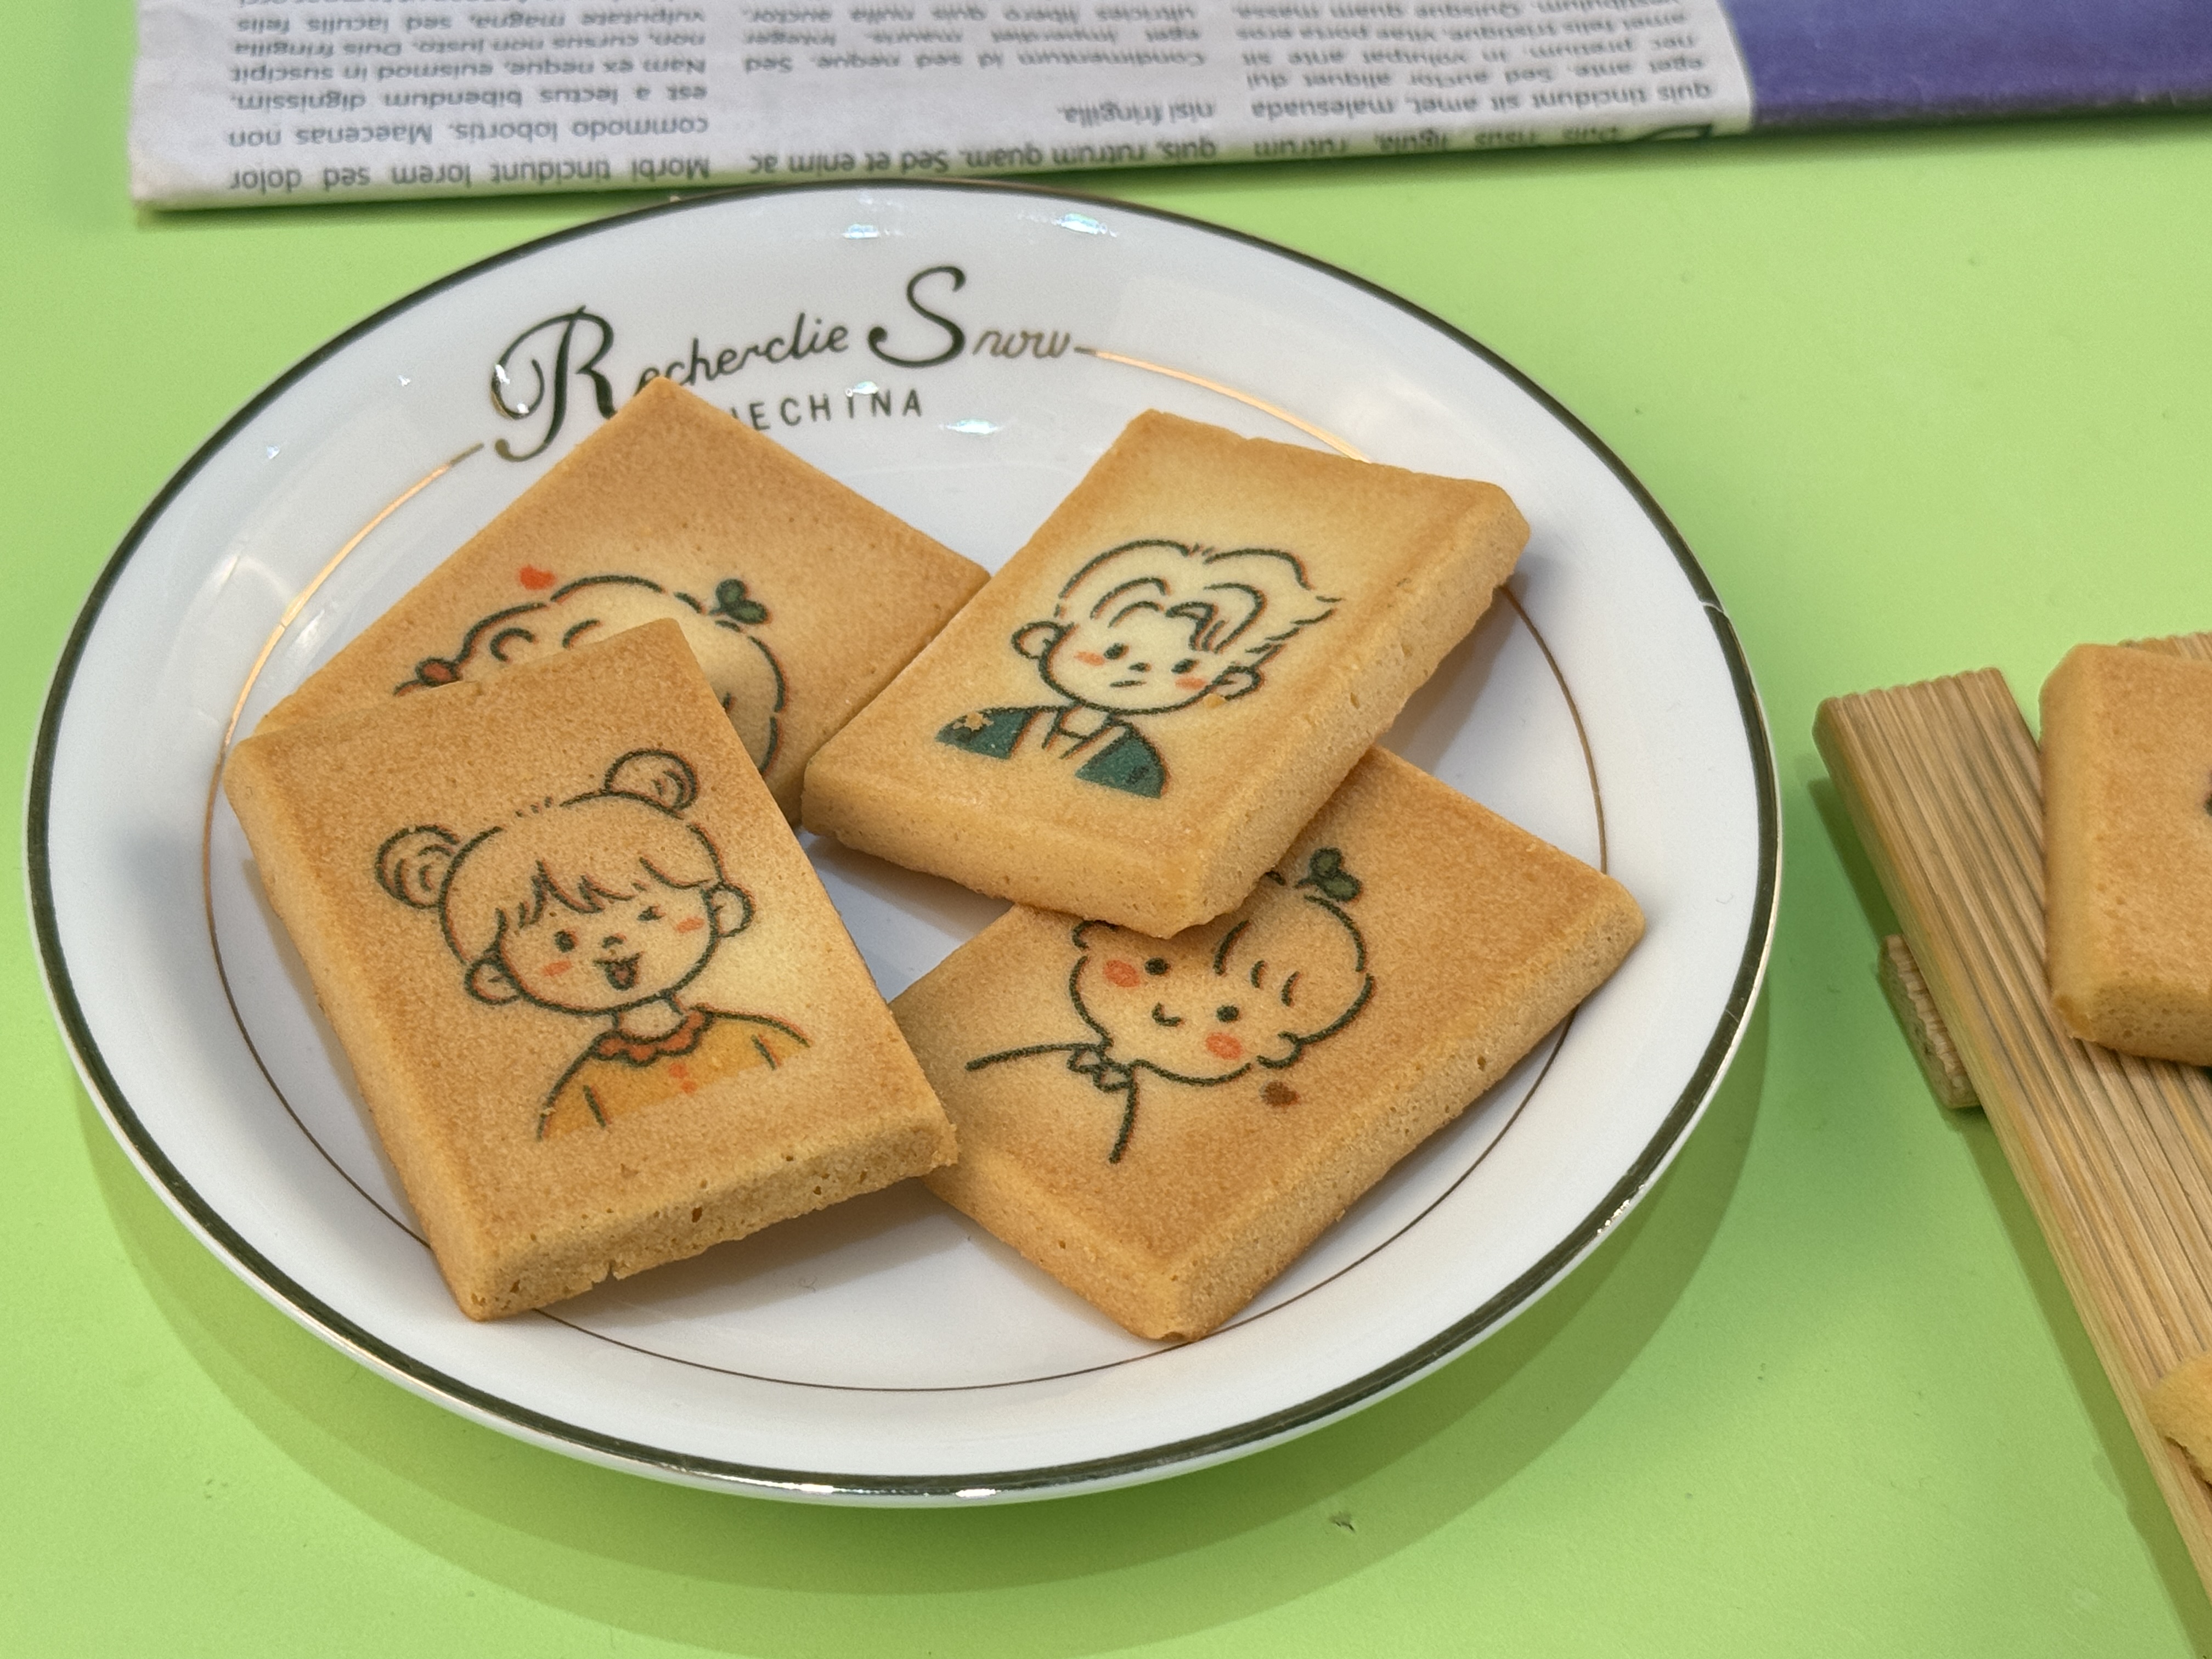 Do you want cookies with cute cartoon patterns？